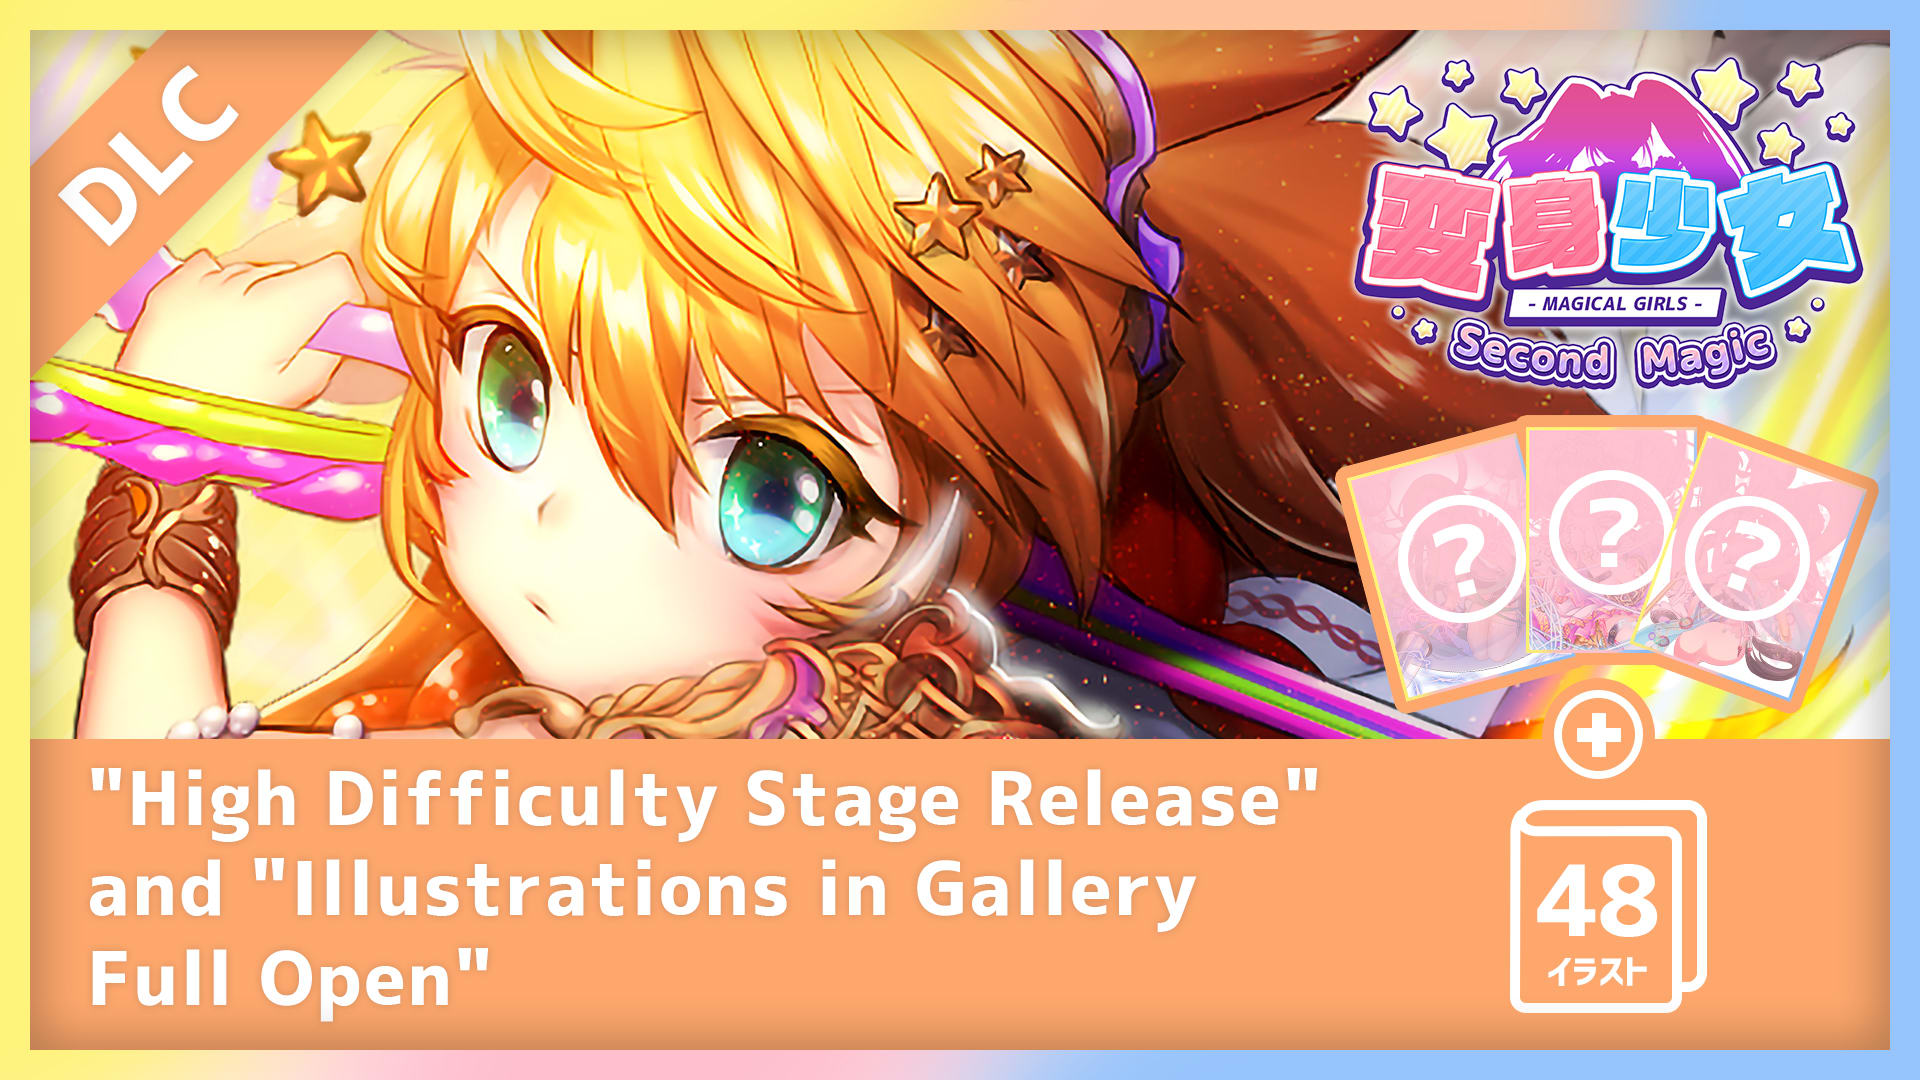 "High Difficulty Stage Release" and "Illustrations in Gallery Full Open"